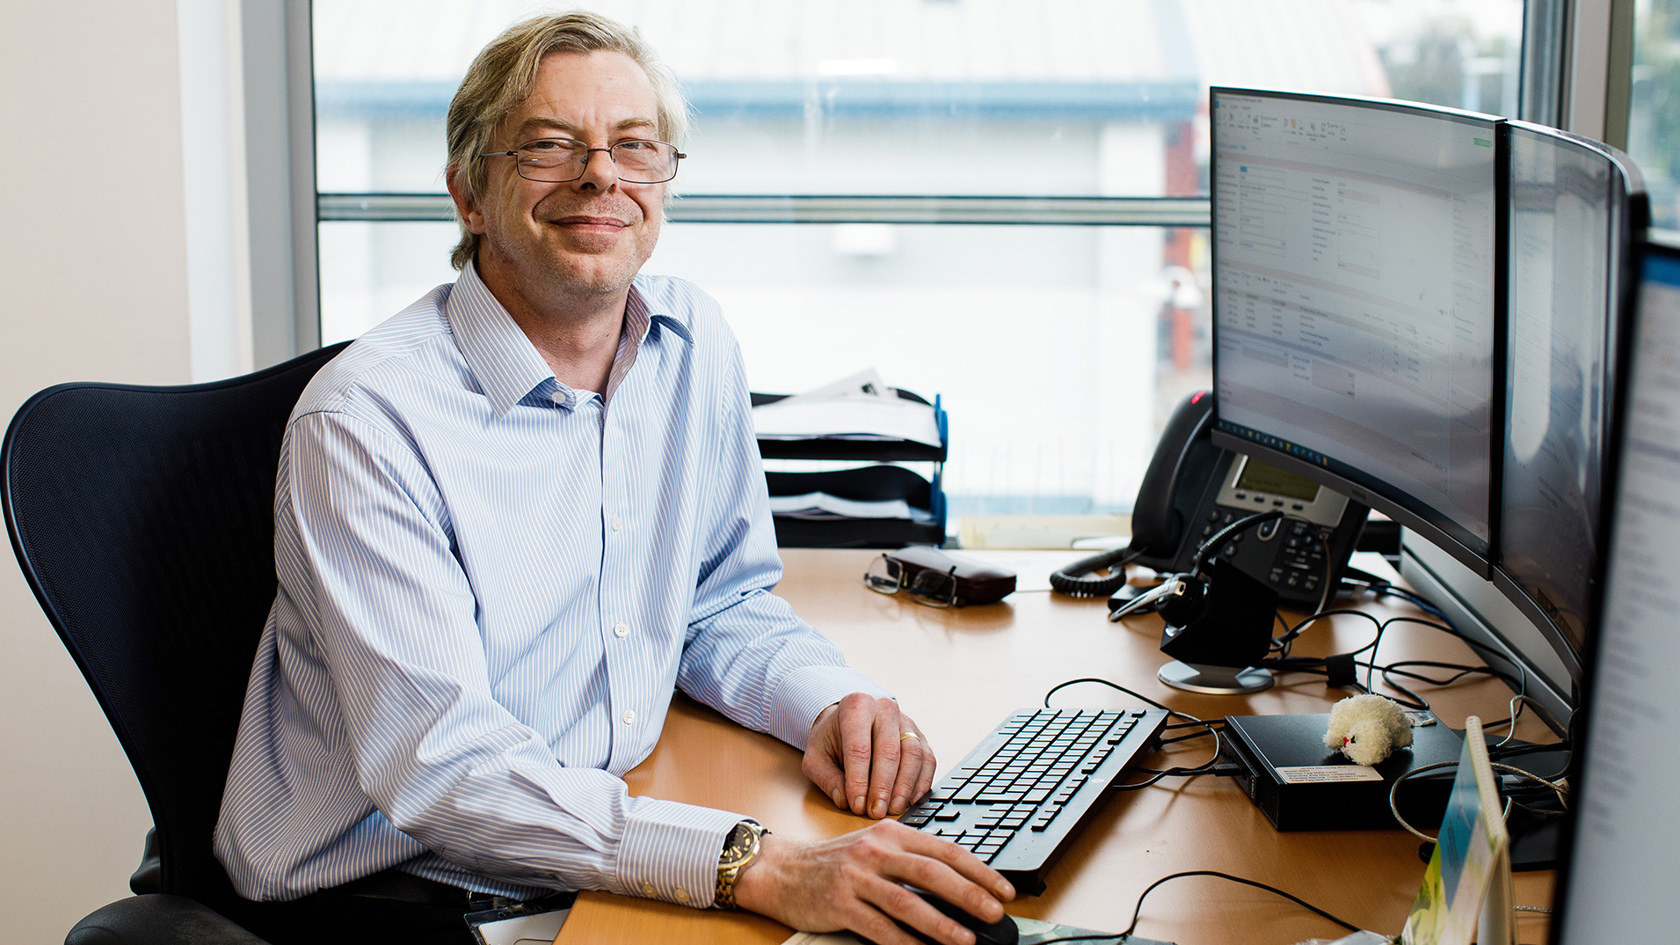 Scott Aldridge is photographed at his desk in the Jersey Electricity Powerhouse offices.